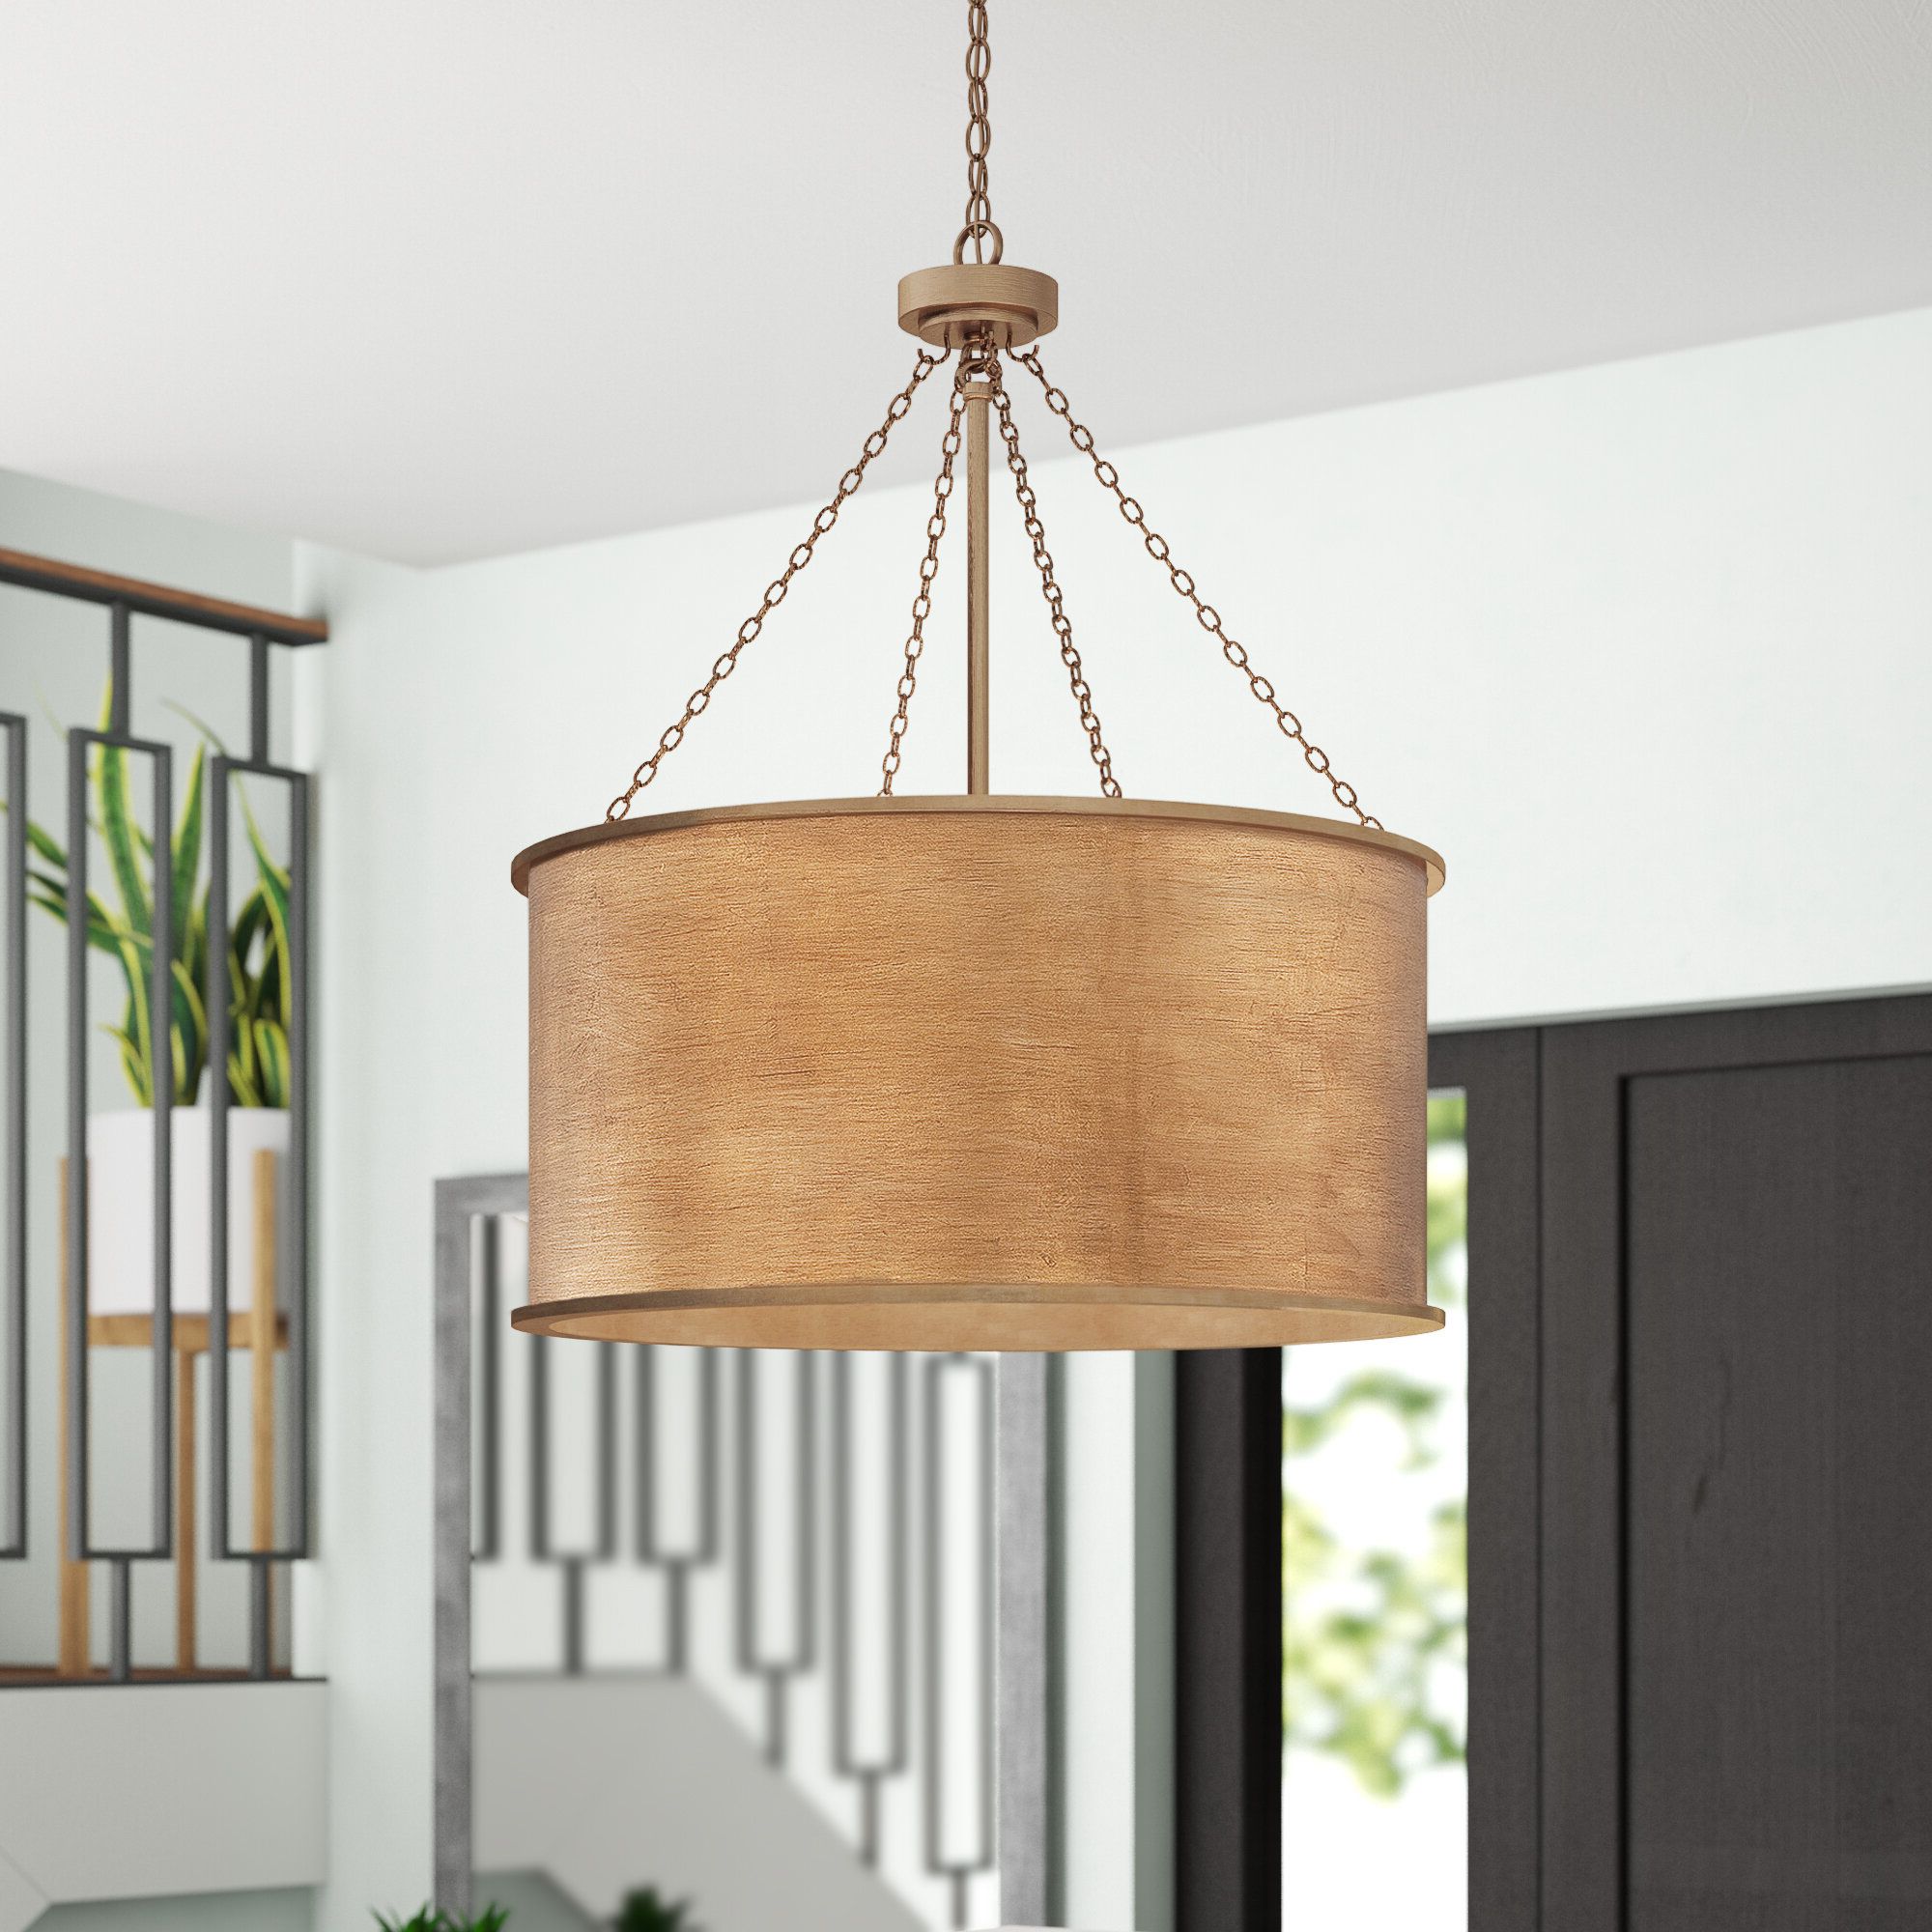 Emaria 3 Light Single Drum Pendants With Regard To Best And Newest Cranston 4 Light Drum Chandelier (View 20 of 25)